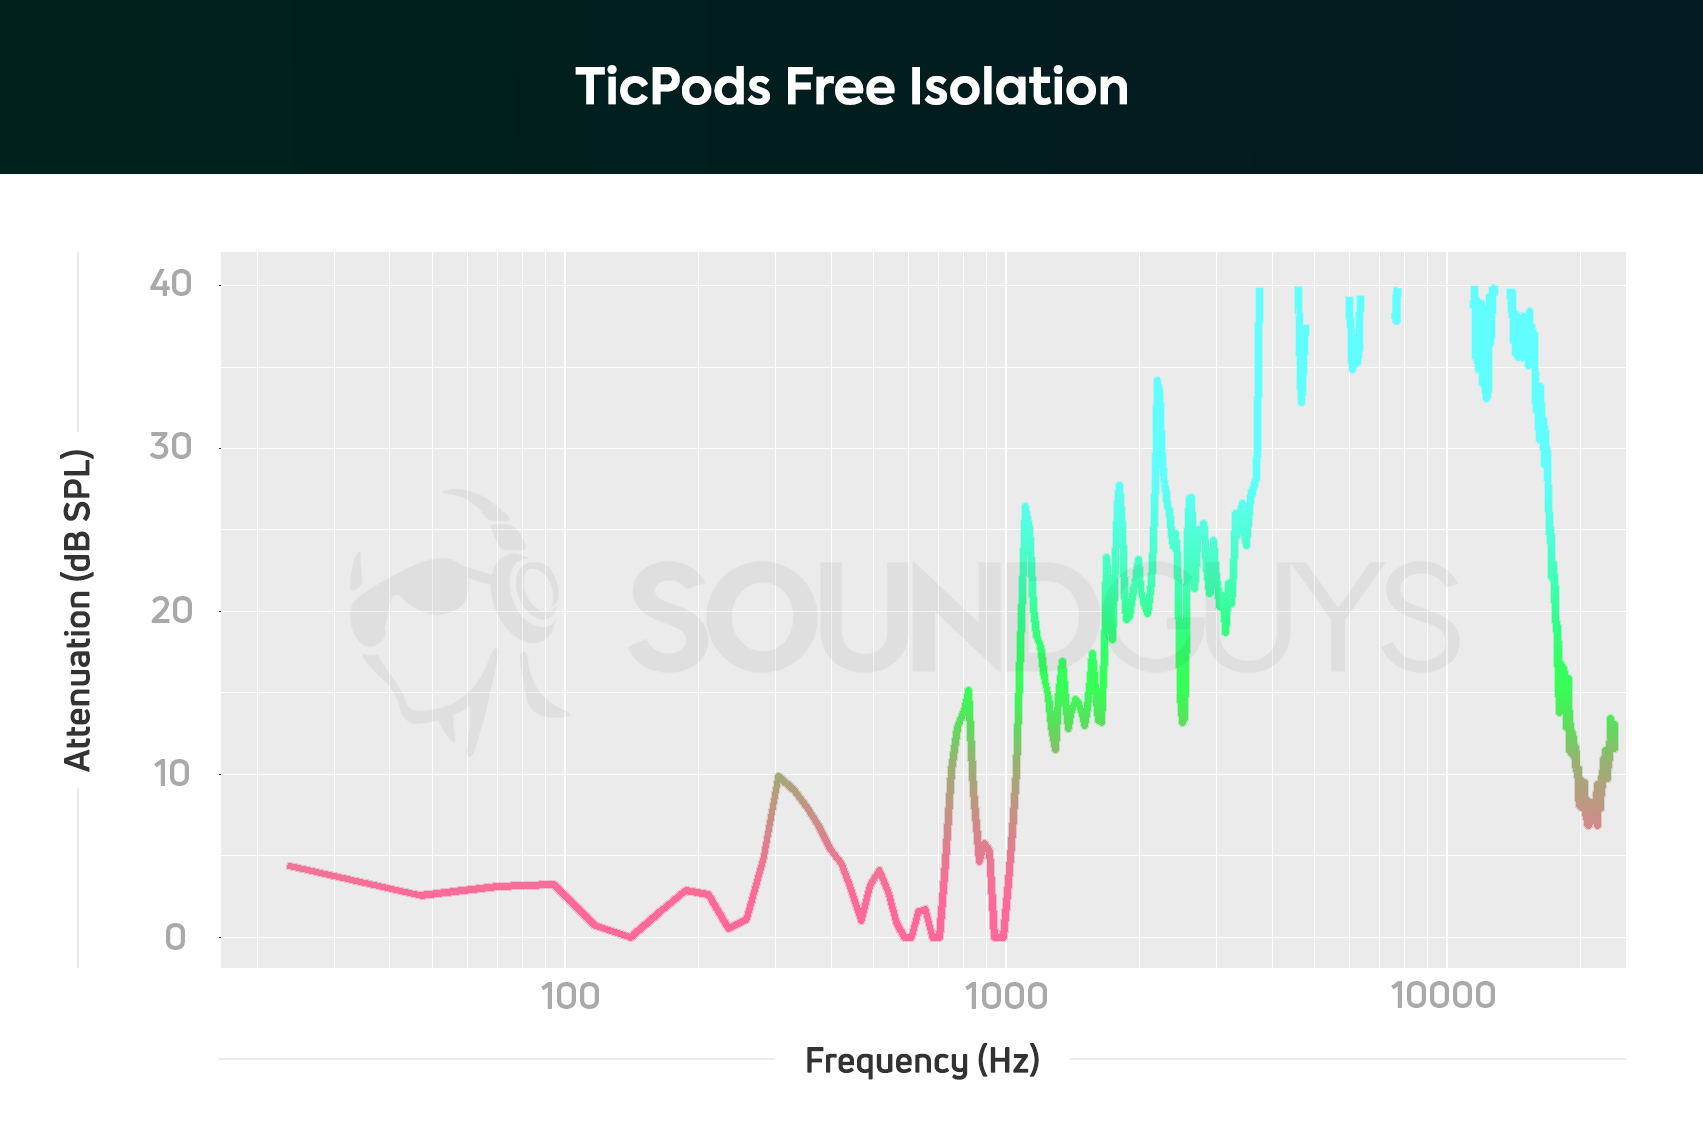 A chart showing the isolation performance of the Mobvoi TicPods free.